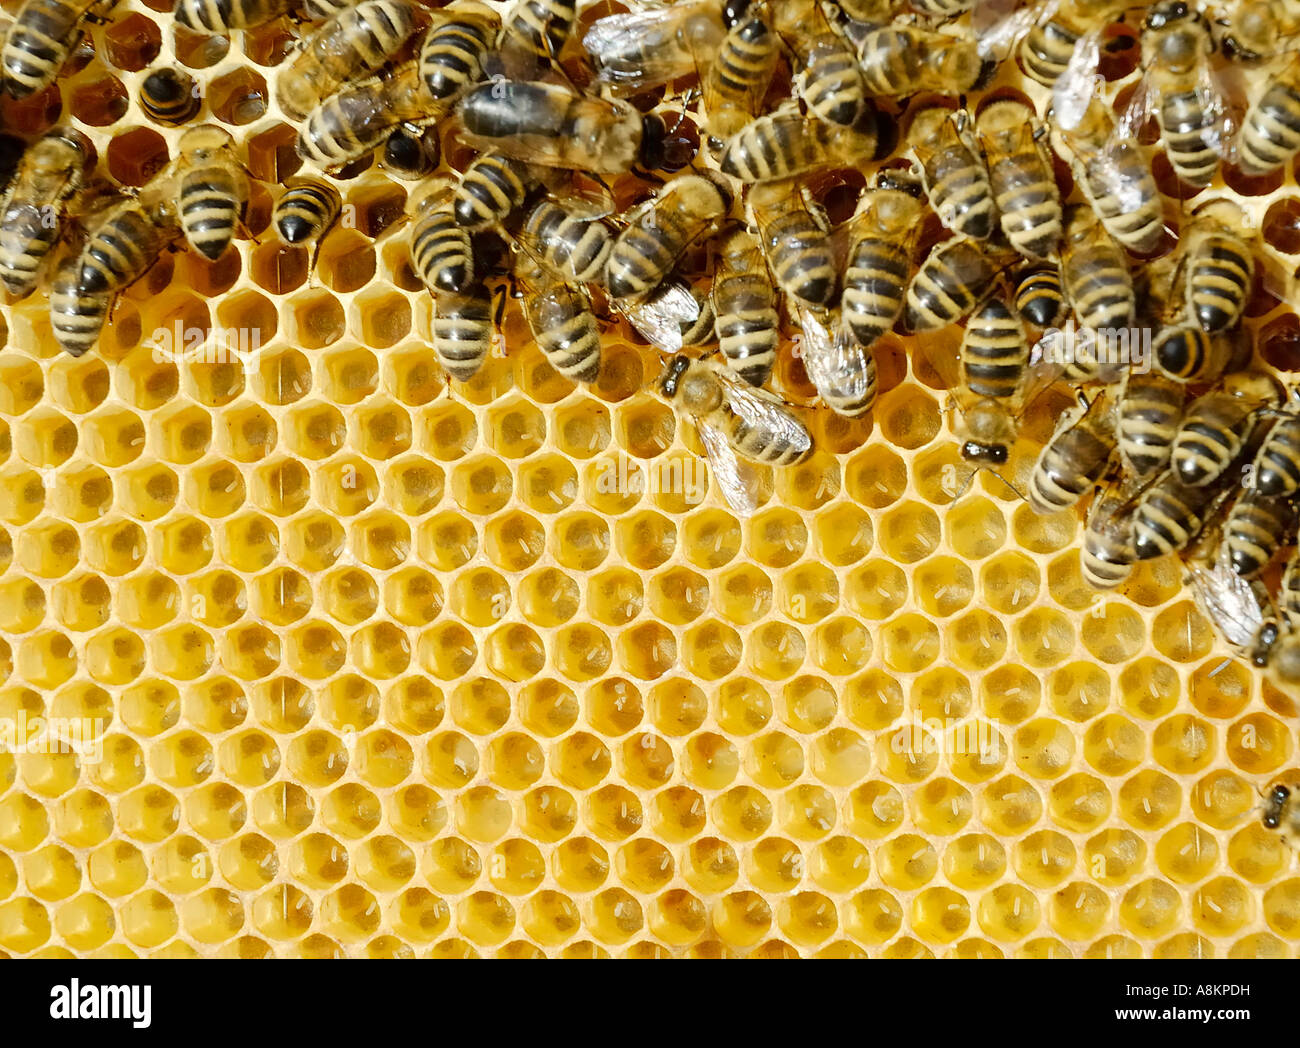 Bees suckling honey from the cells of recently constructed honey cells Stock Photo